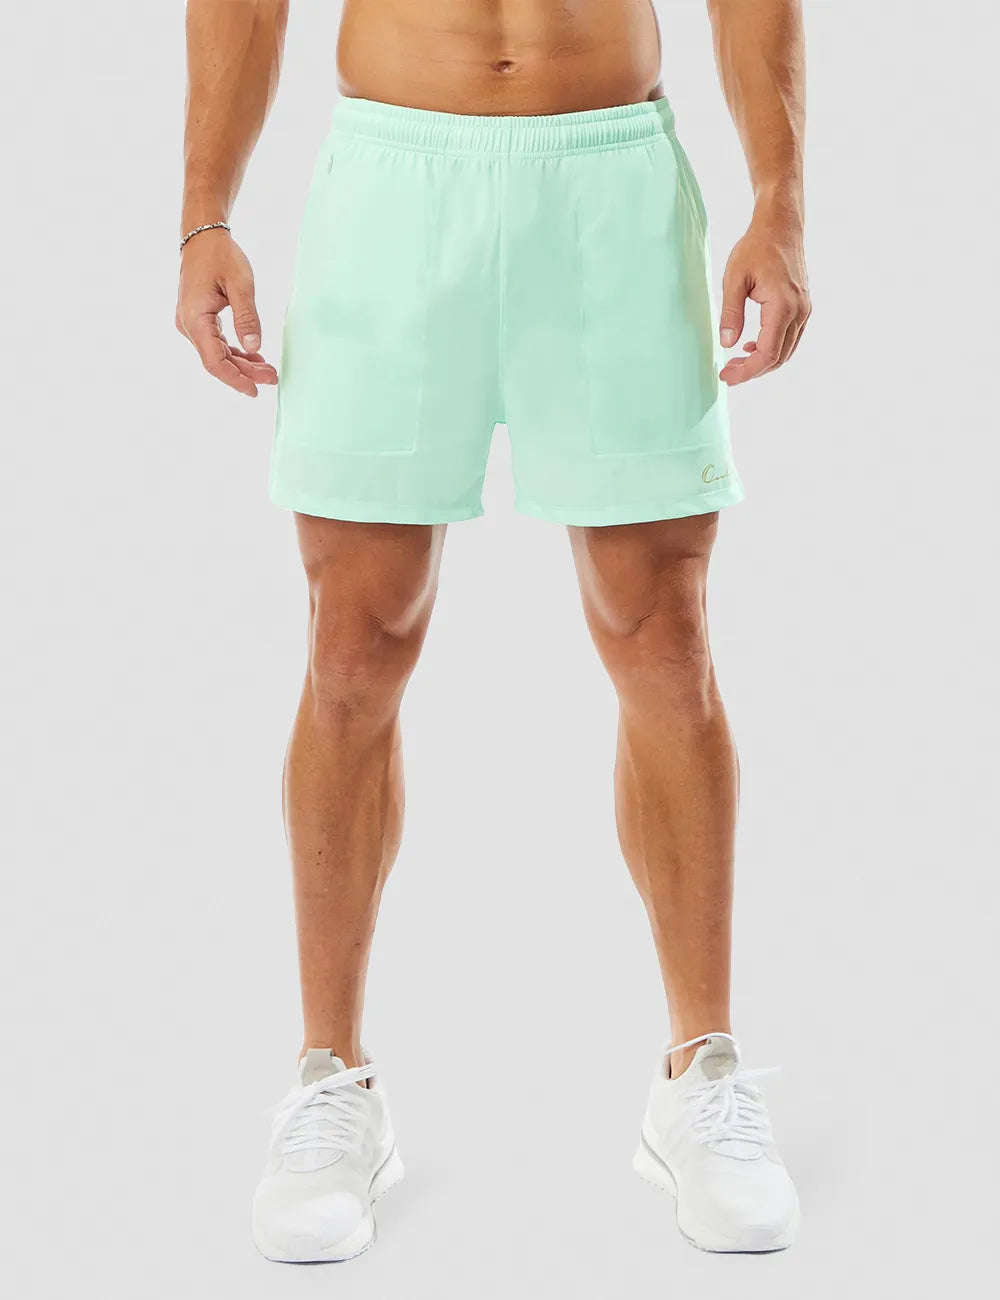 Solid Gym Shorts 5"